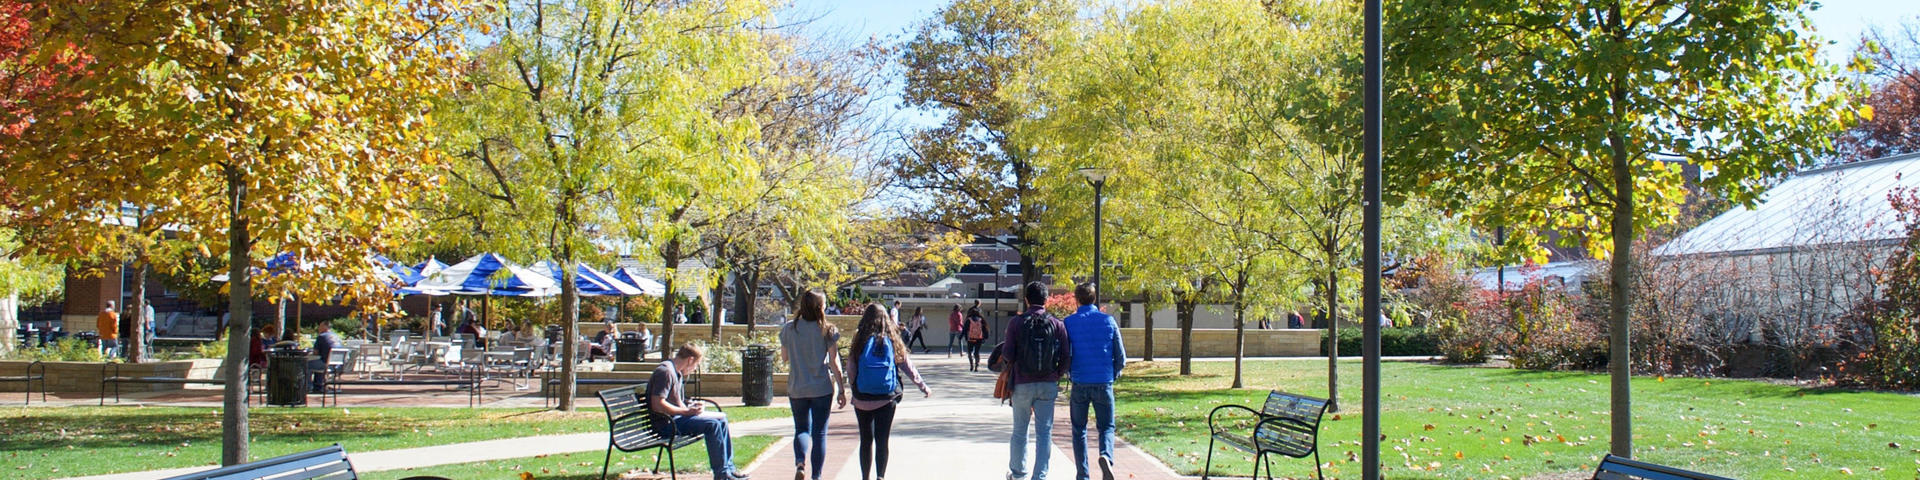 campus in the fall with students walking